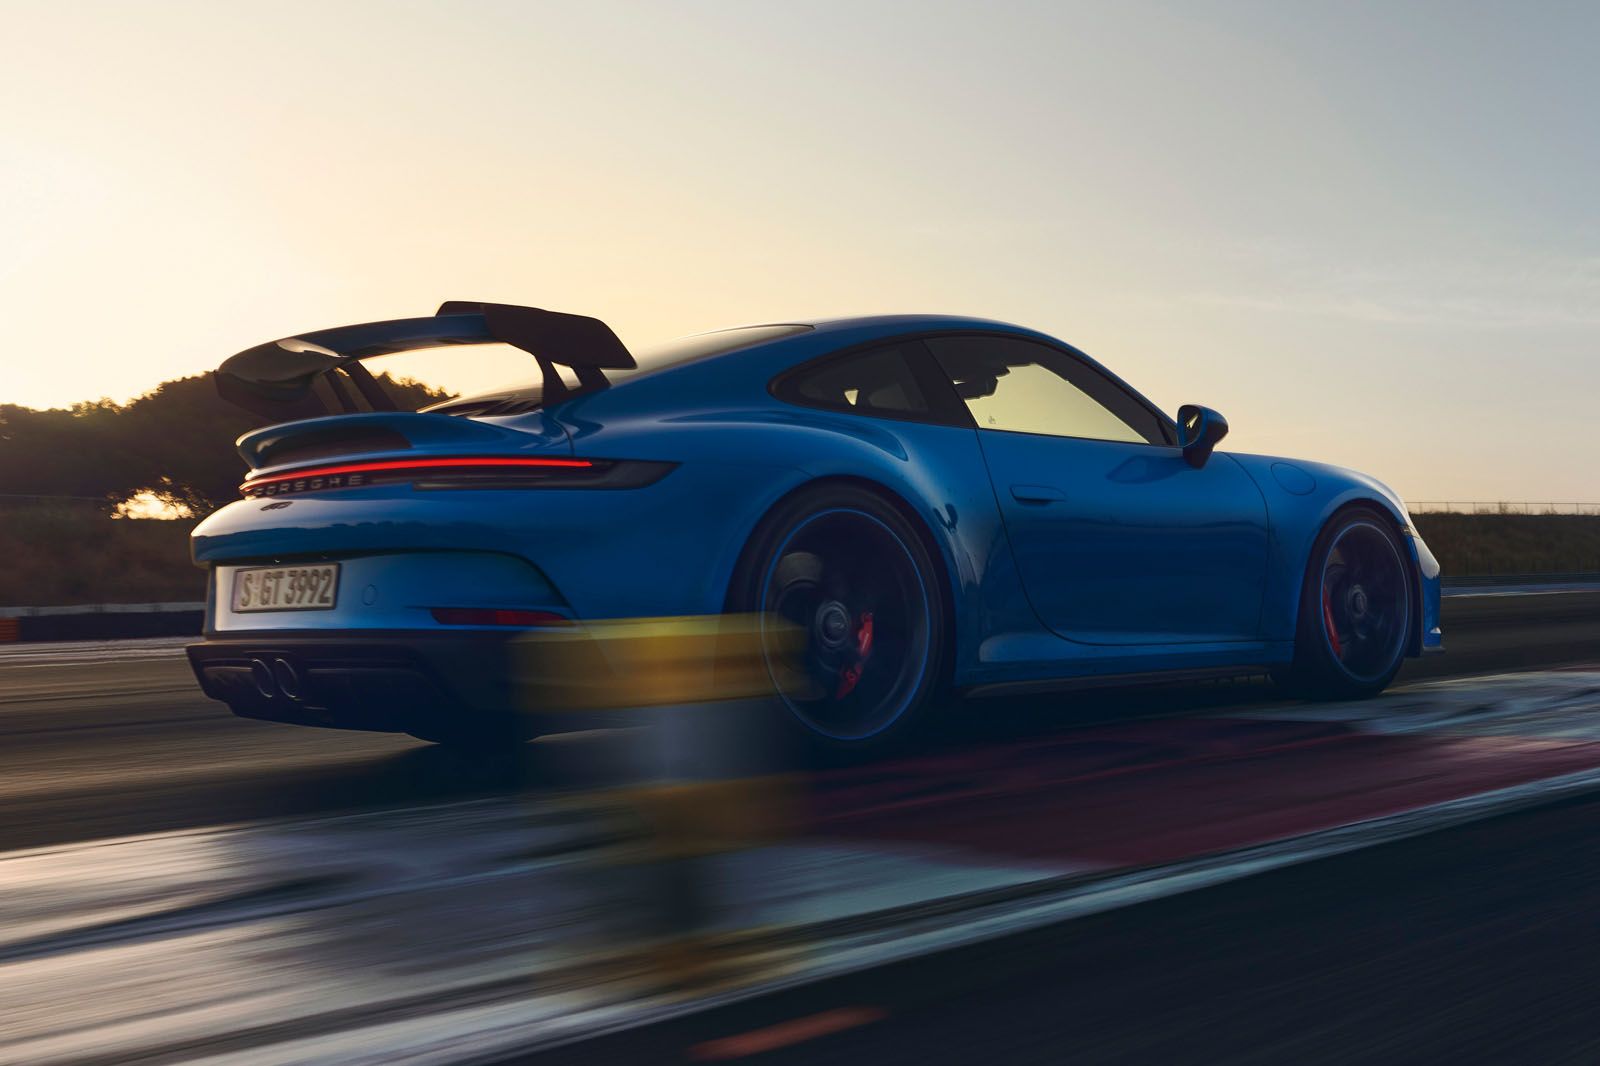 New 2021 Porsche 911 GT3 unleashed with 503bhp